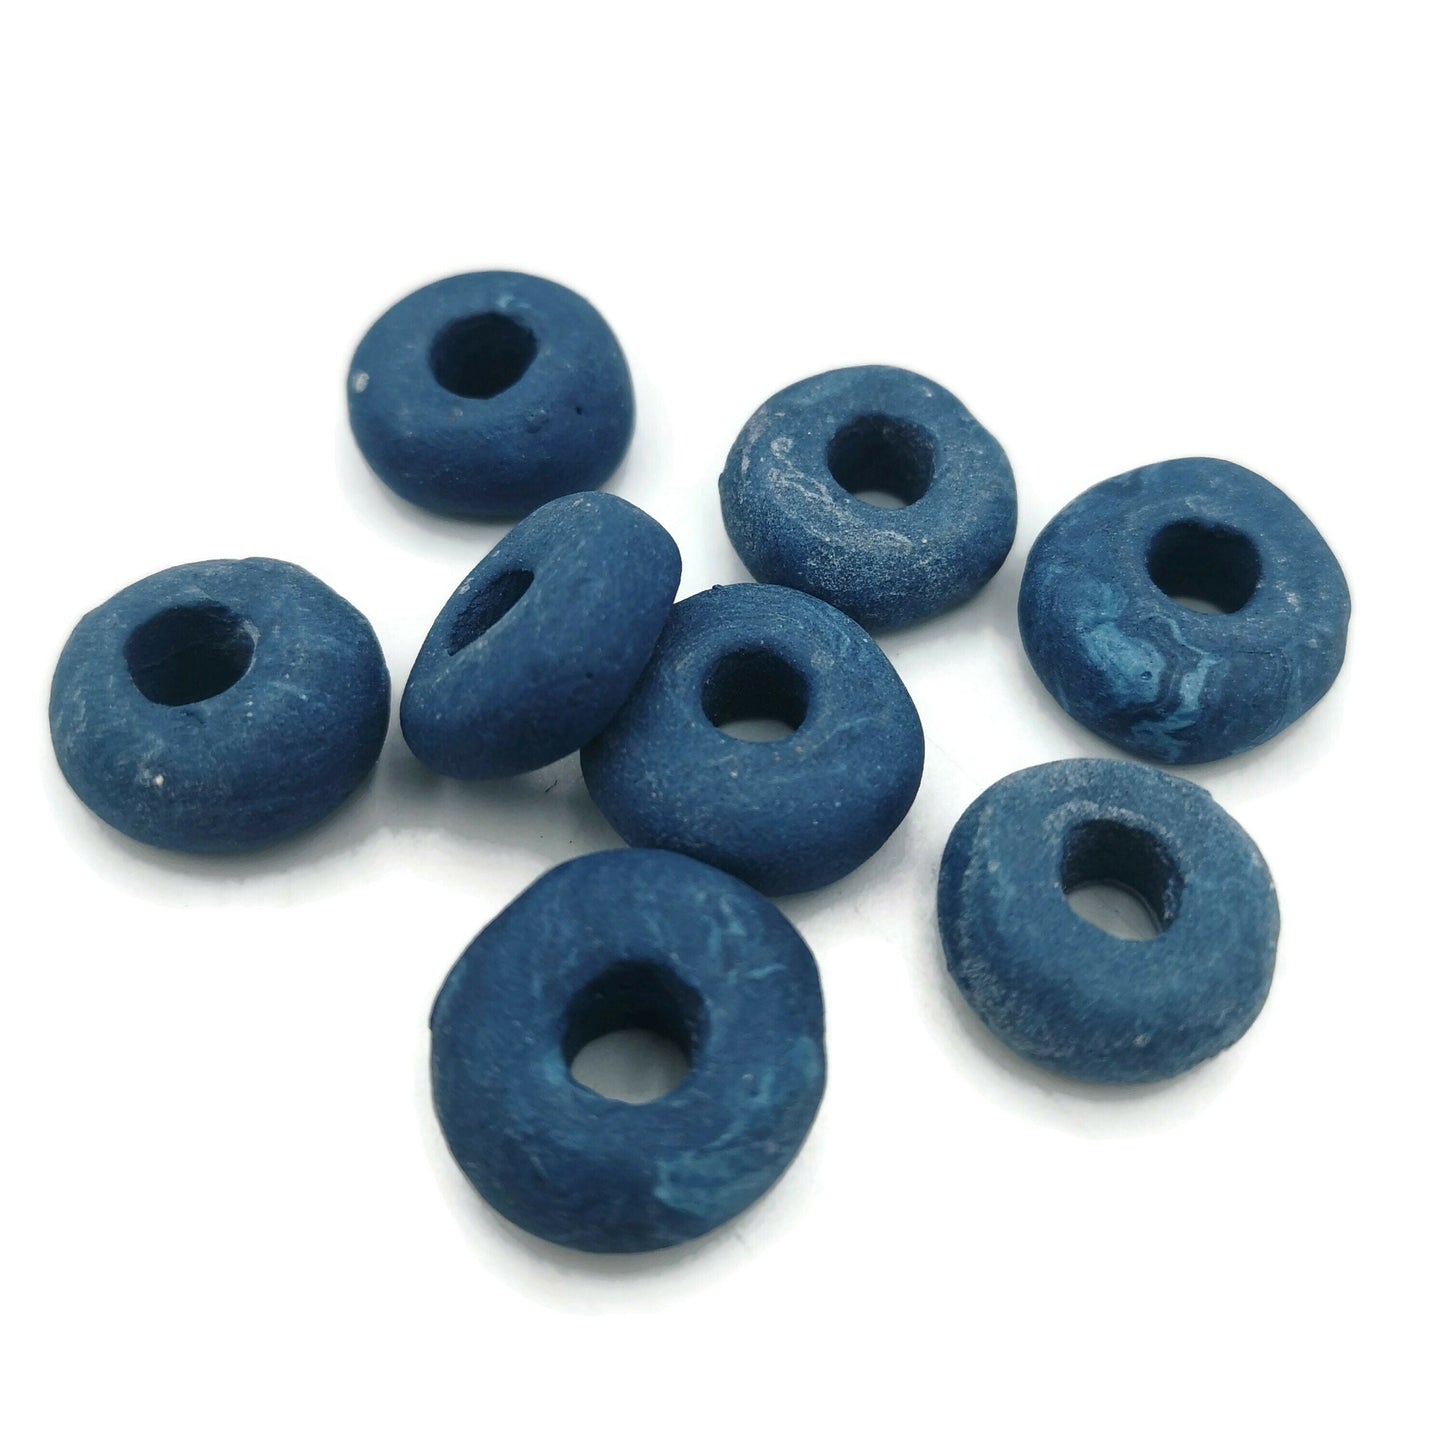 CERAMIC TUBE BEADS, Macrame Beads, Clay Spacer Beads, Set of 8 Craft Beads For Jewerlry Making, Long Tube Beads With Large Hole - Ceramica Ana Rafael